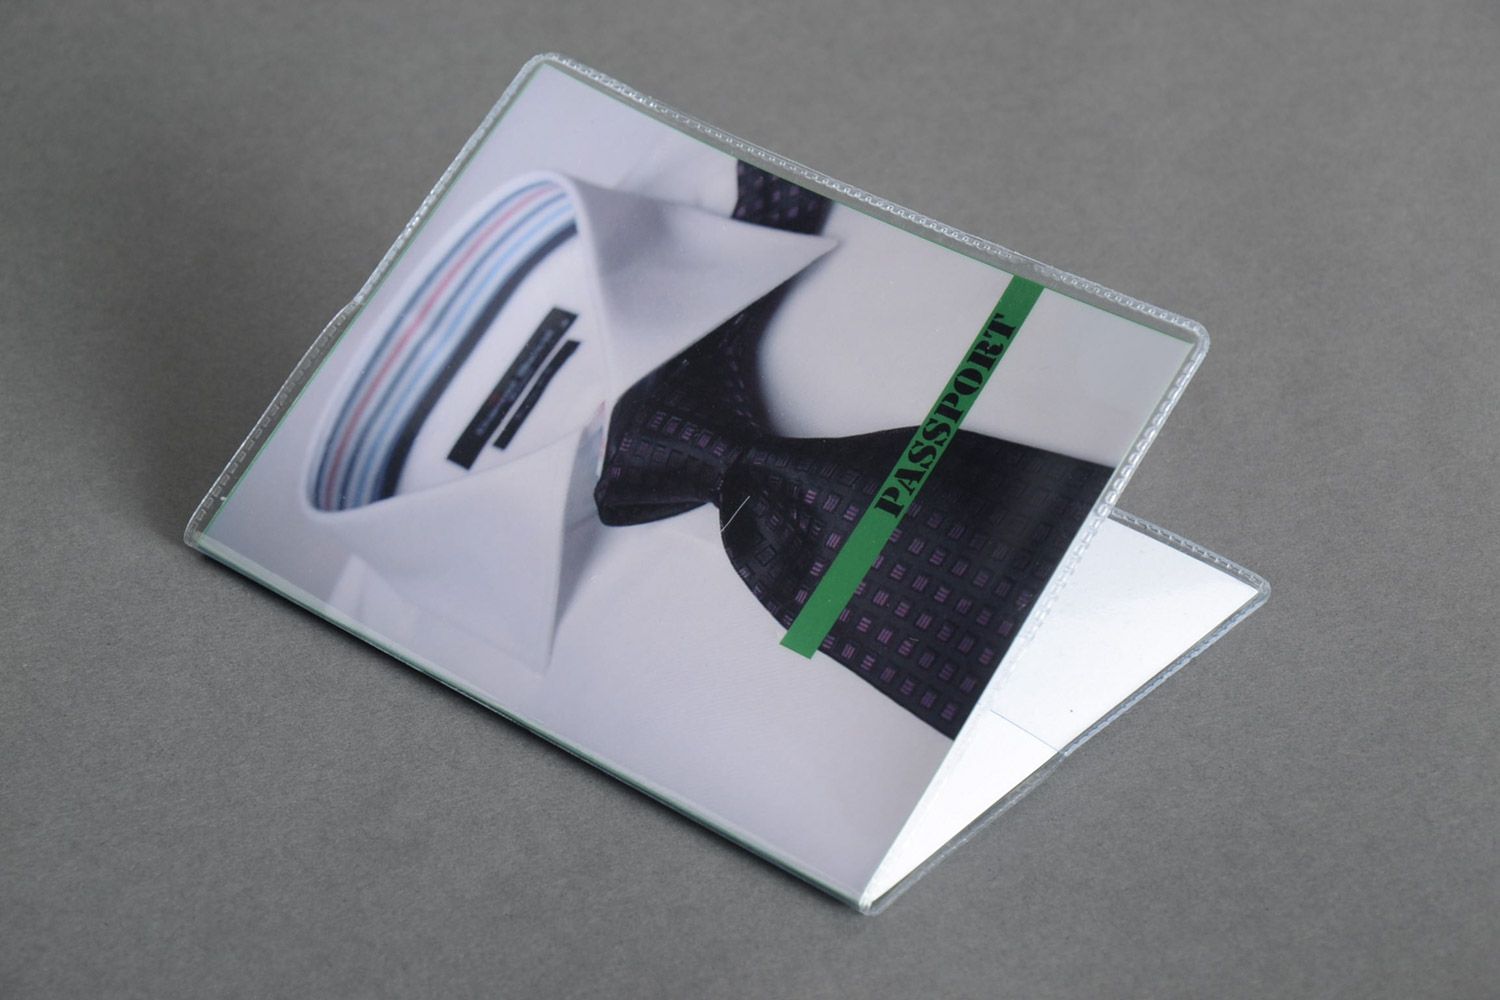 Handmade white plastic passport cover with image of collar and tie for men photo 2